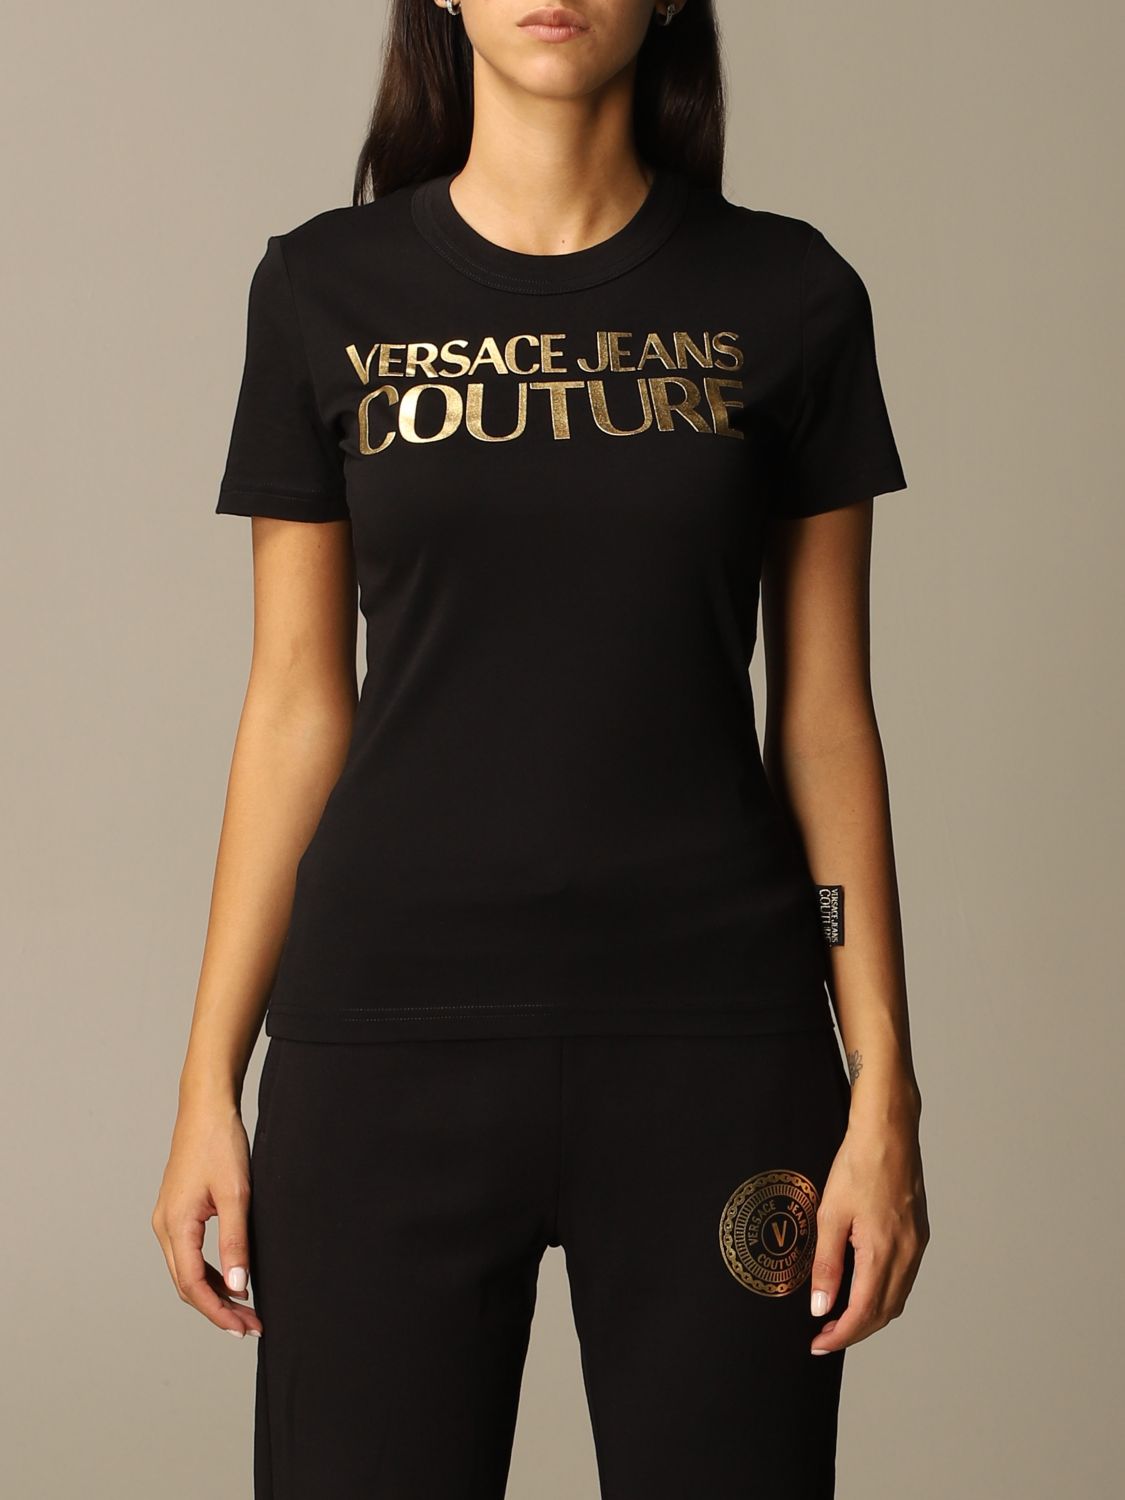 versace jeans couture woman